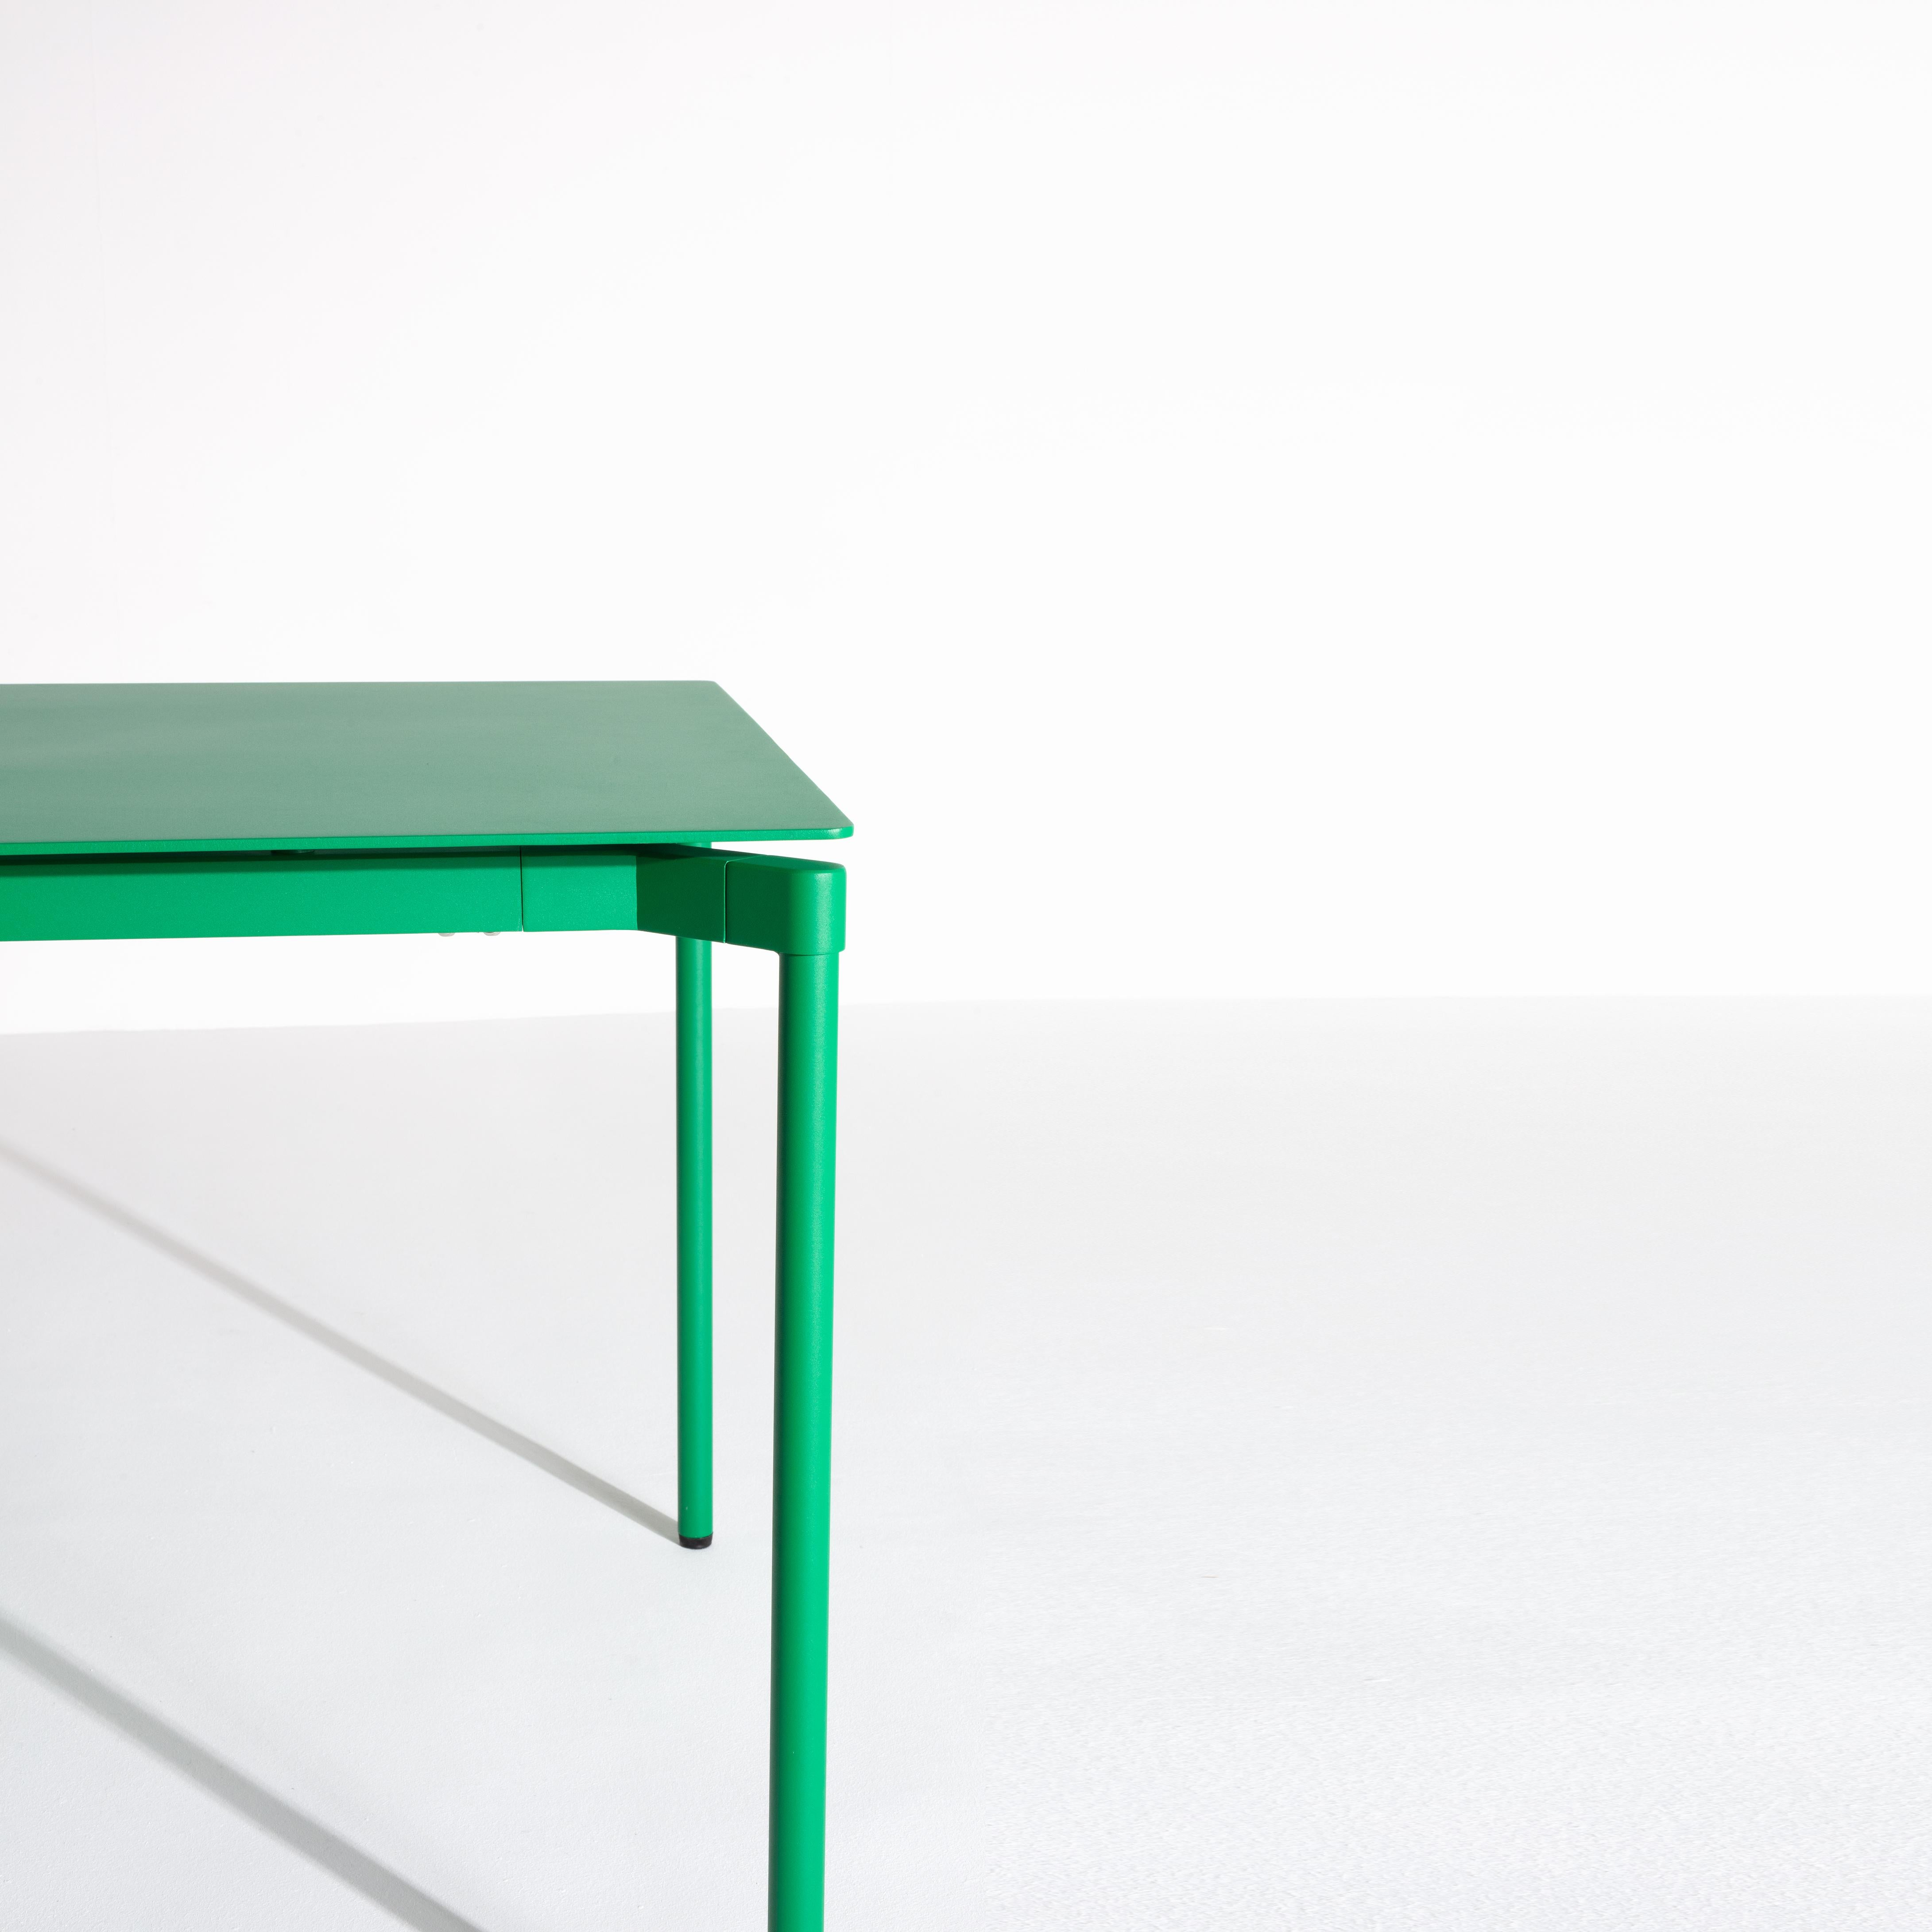 Aluminum Petite Friture Fromme Rectangular Table in Mint-Green Aluminium by Tom Chung For Sale